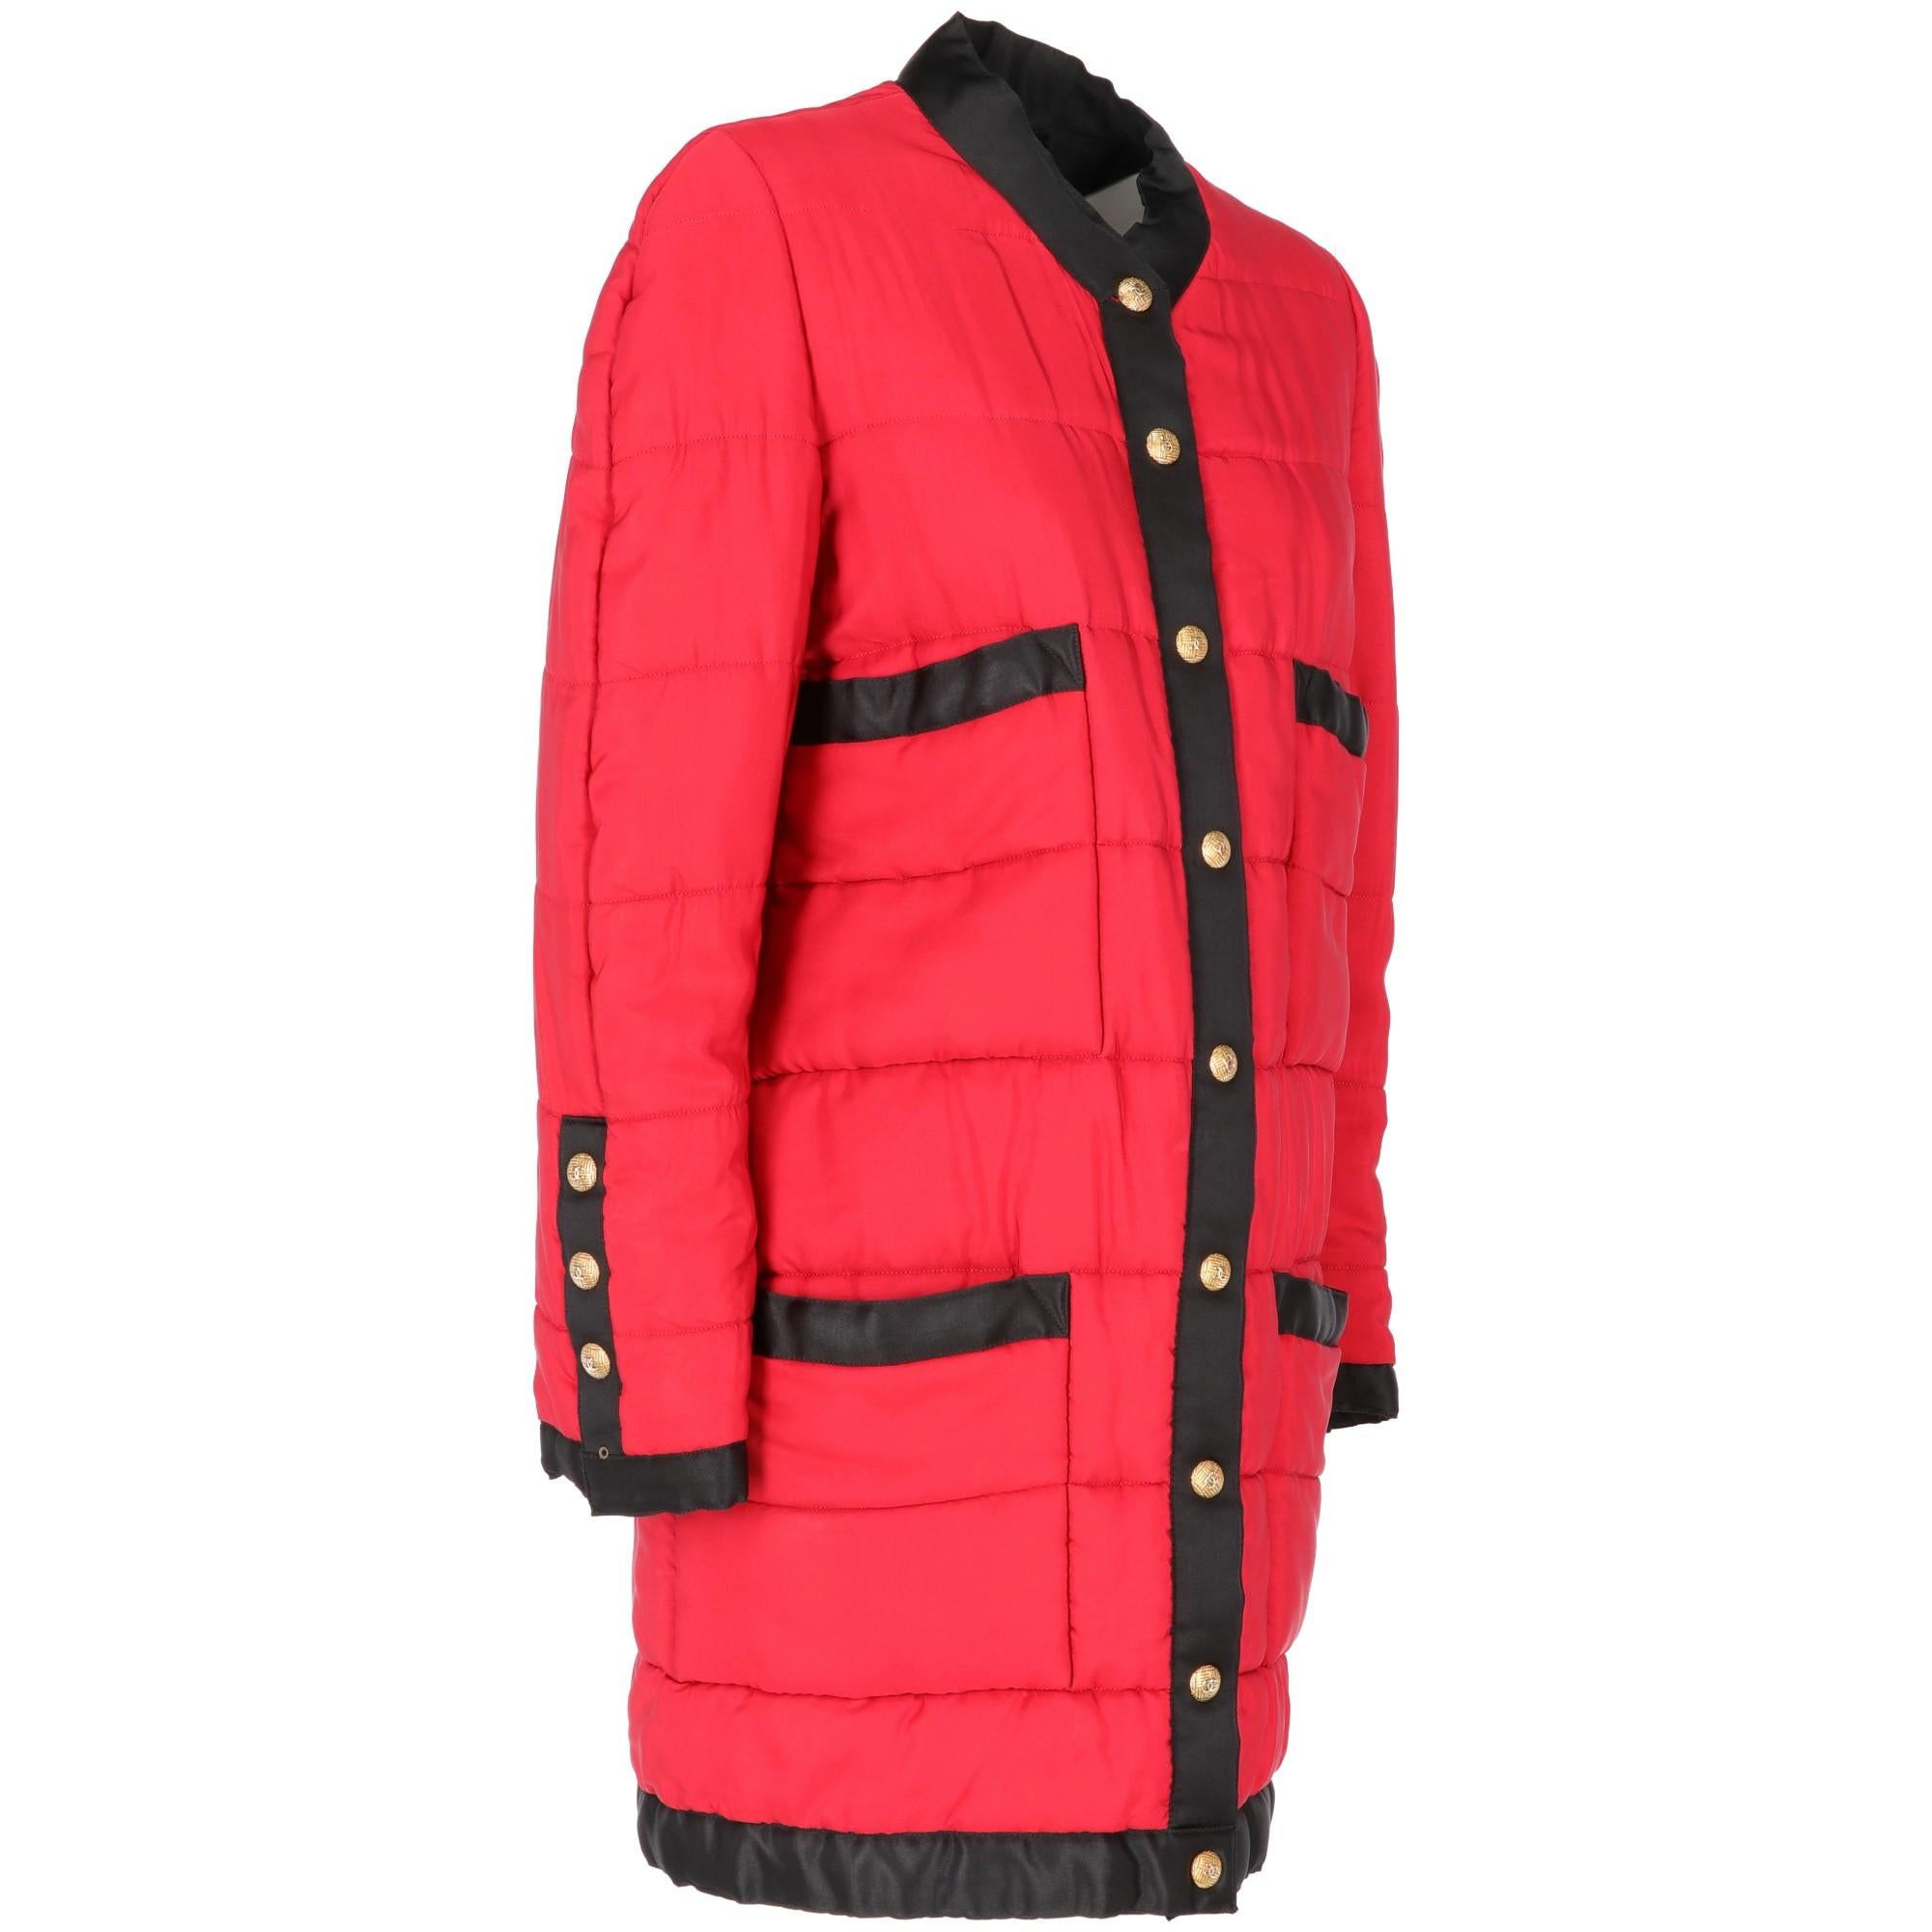 The stylish Chanel black and red quilted duffle coat features a round neckline, front patch-pockets, gold-tone and silver-tone metal buttons with logo on the front buttoned fastening and on the sleeves. With black silk lining, the item shows some